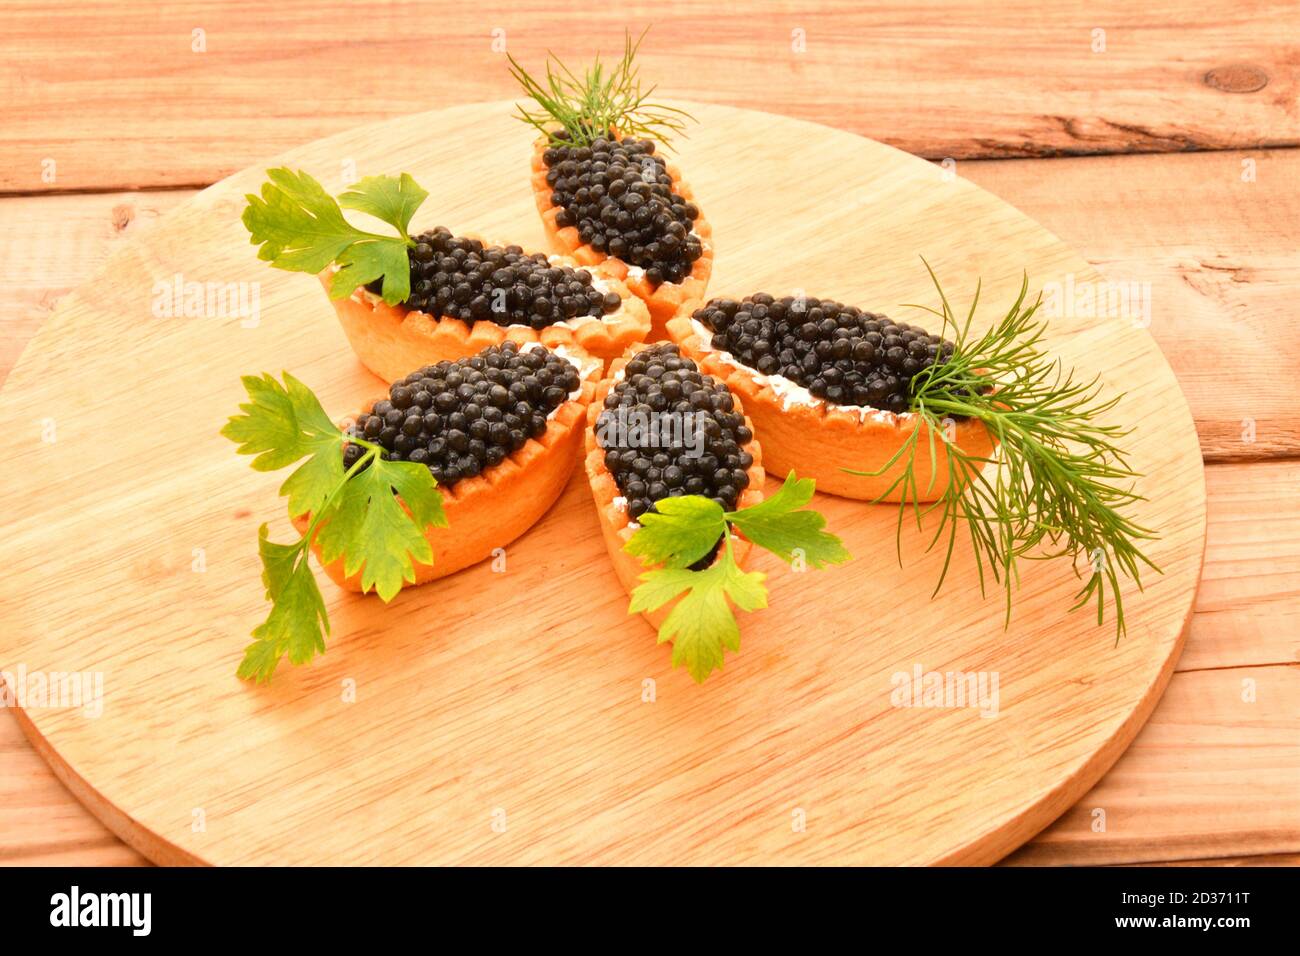 Tartlets with black caviar and fresh greens Stock Photo